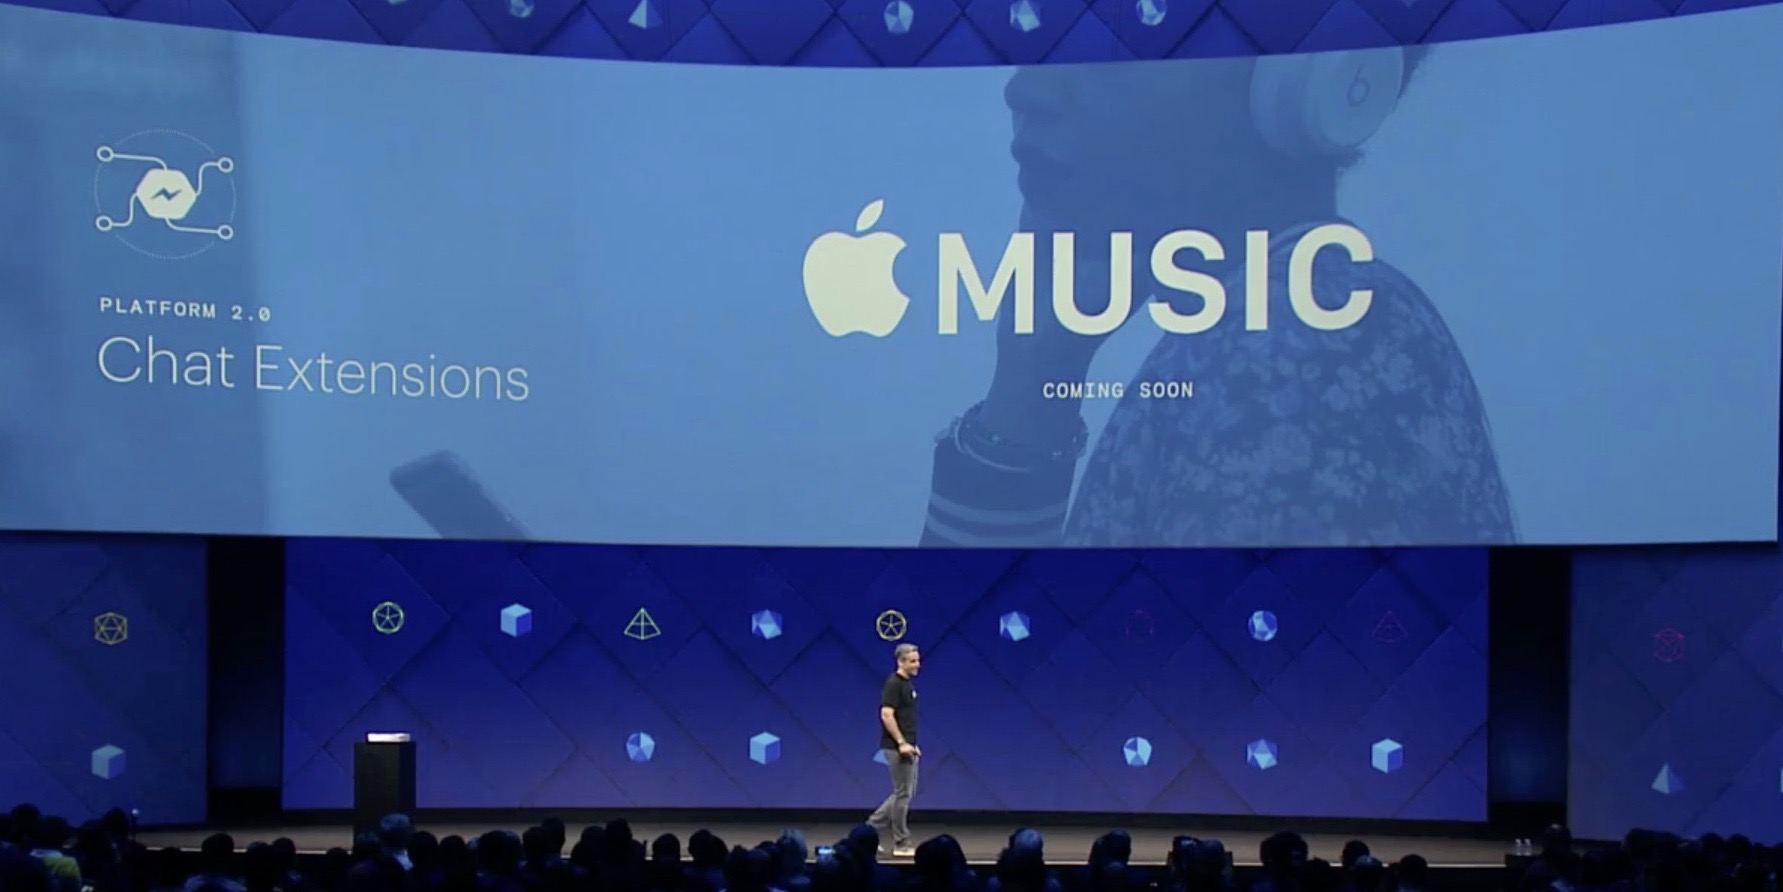 Apple Music and Spotify will soon get extensions for Facebook Messenger [atualizado]